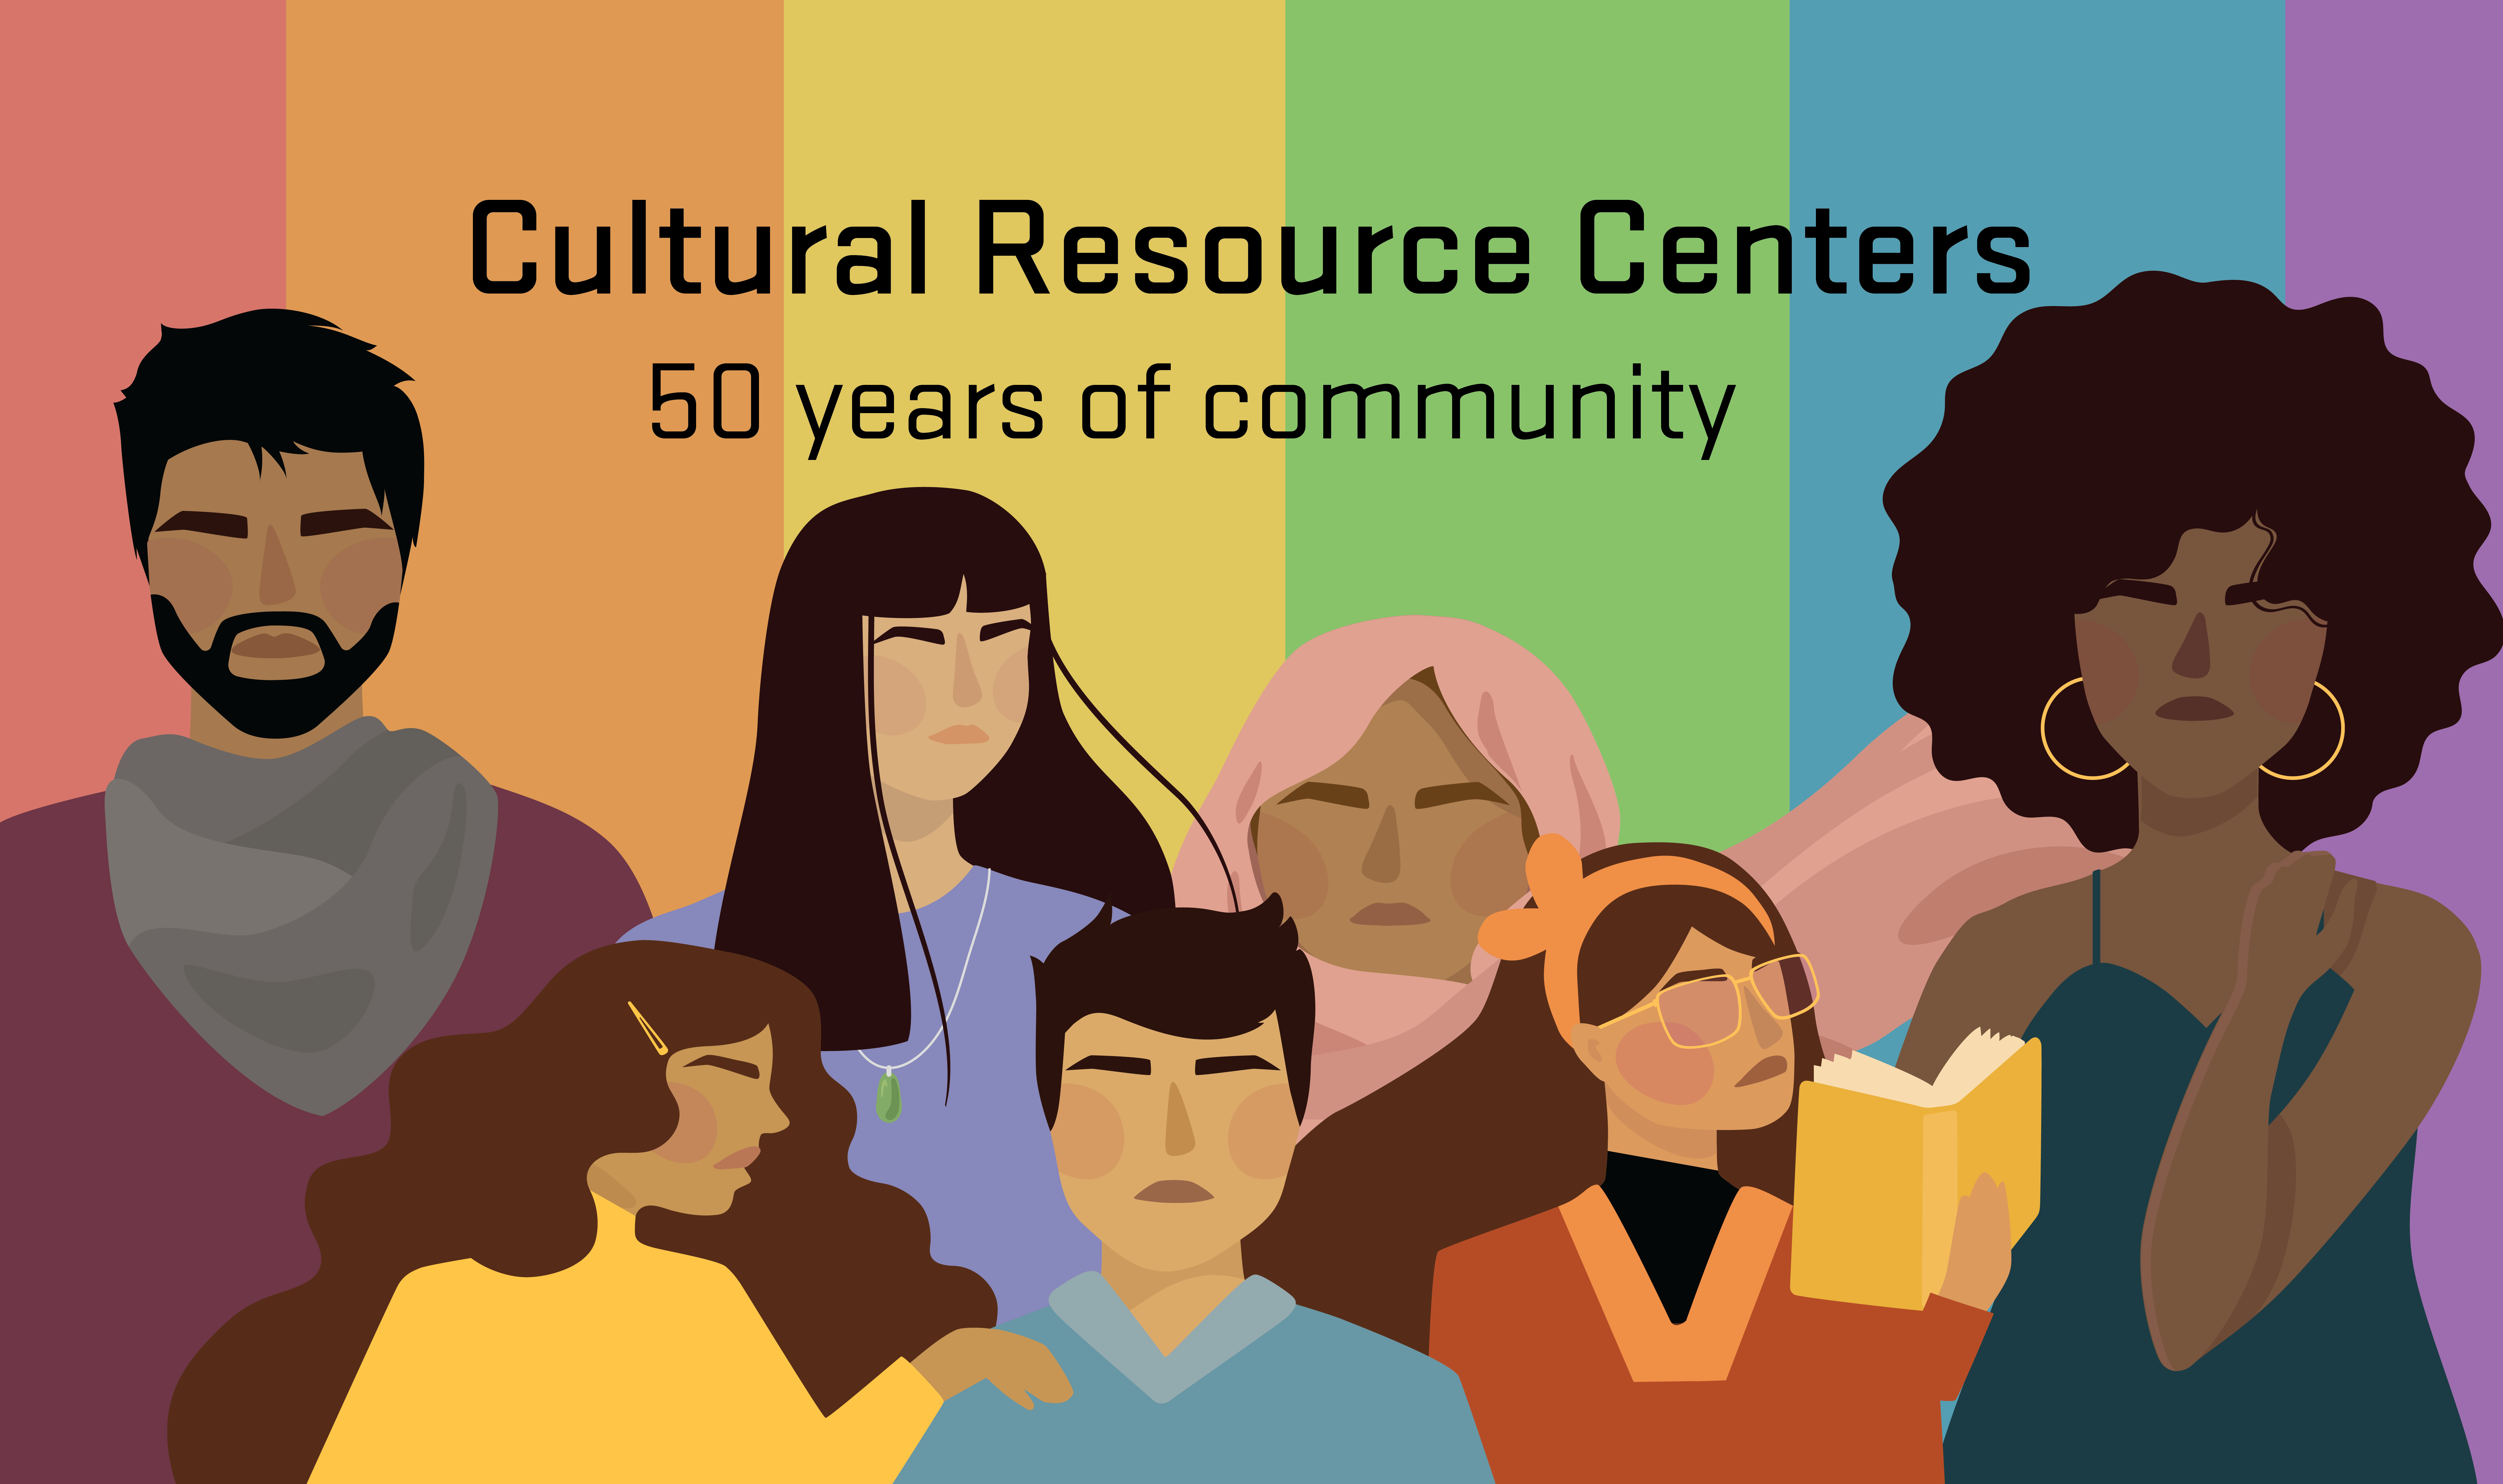 image depicting individuals of various backgrounds against a rainbow colored background. Text reads: "Cultural Resource Centers. 50 years of community"